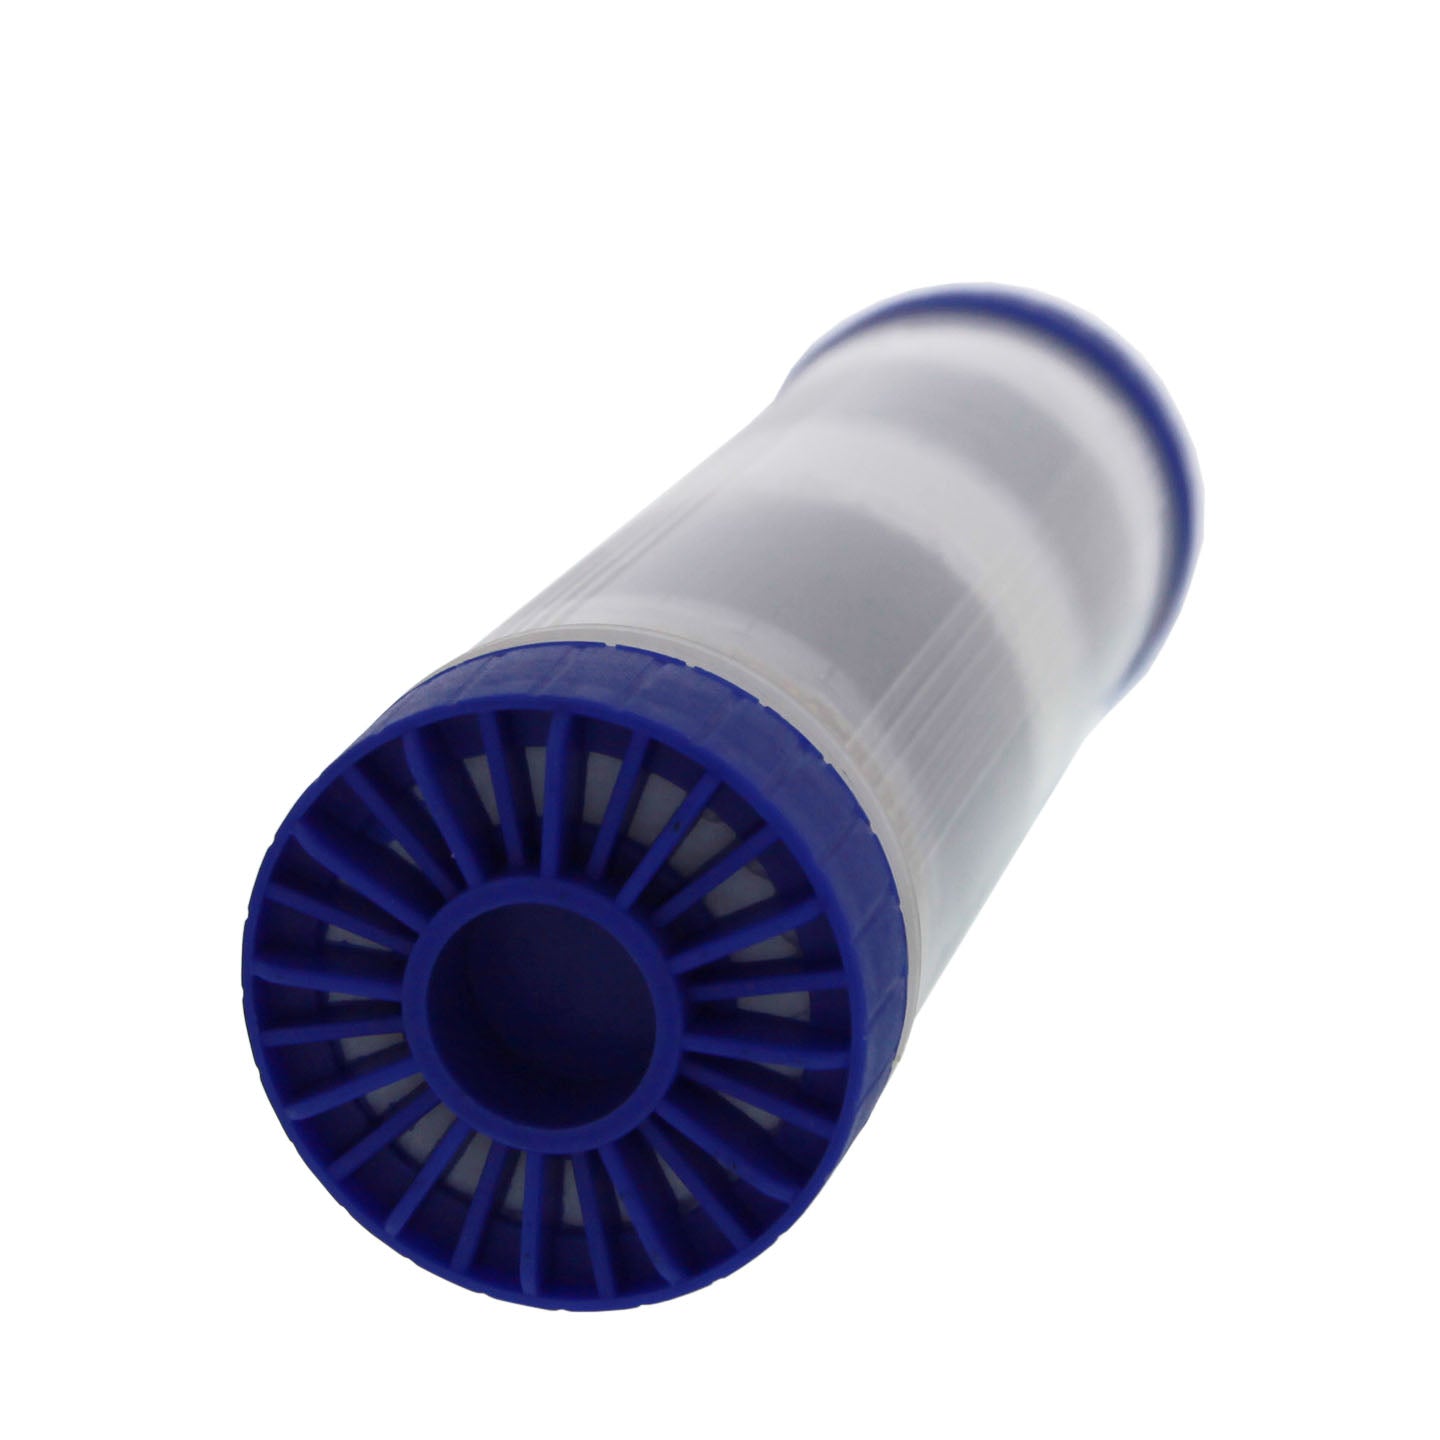 10 x 2.5 Inch 10 Stage Countertop or Undersink Filter Cartridge Replacement by Tier1 (Bottom View)